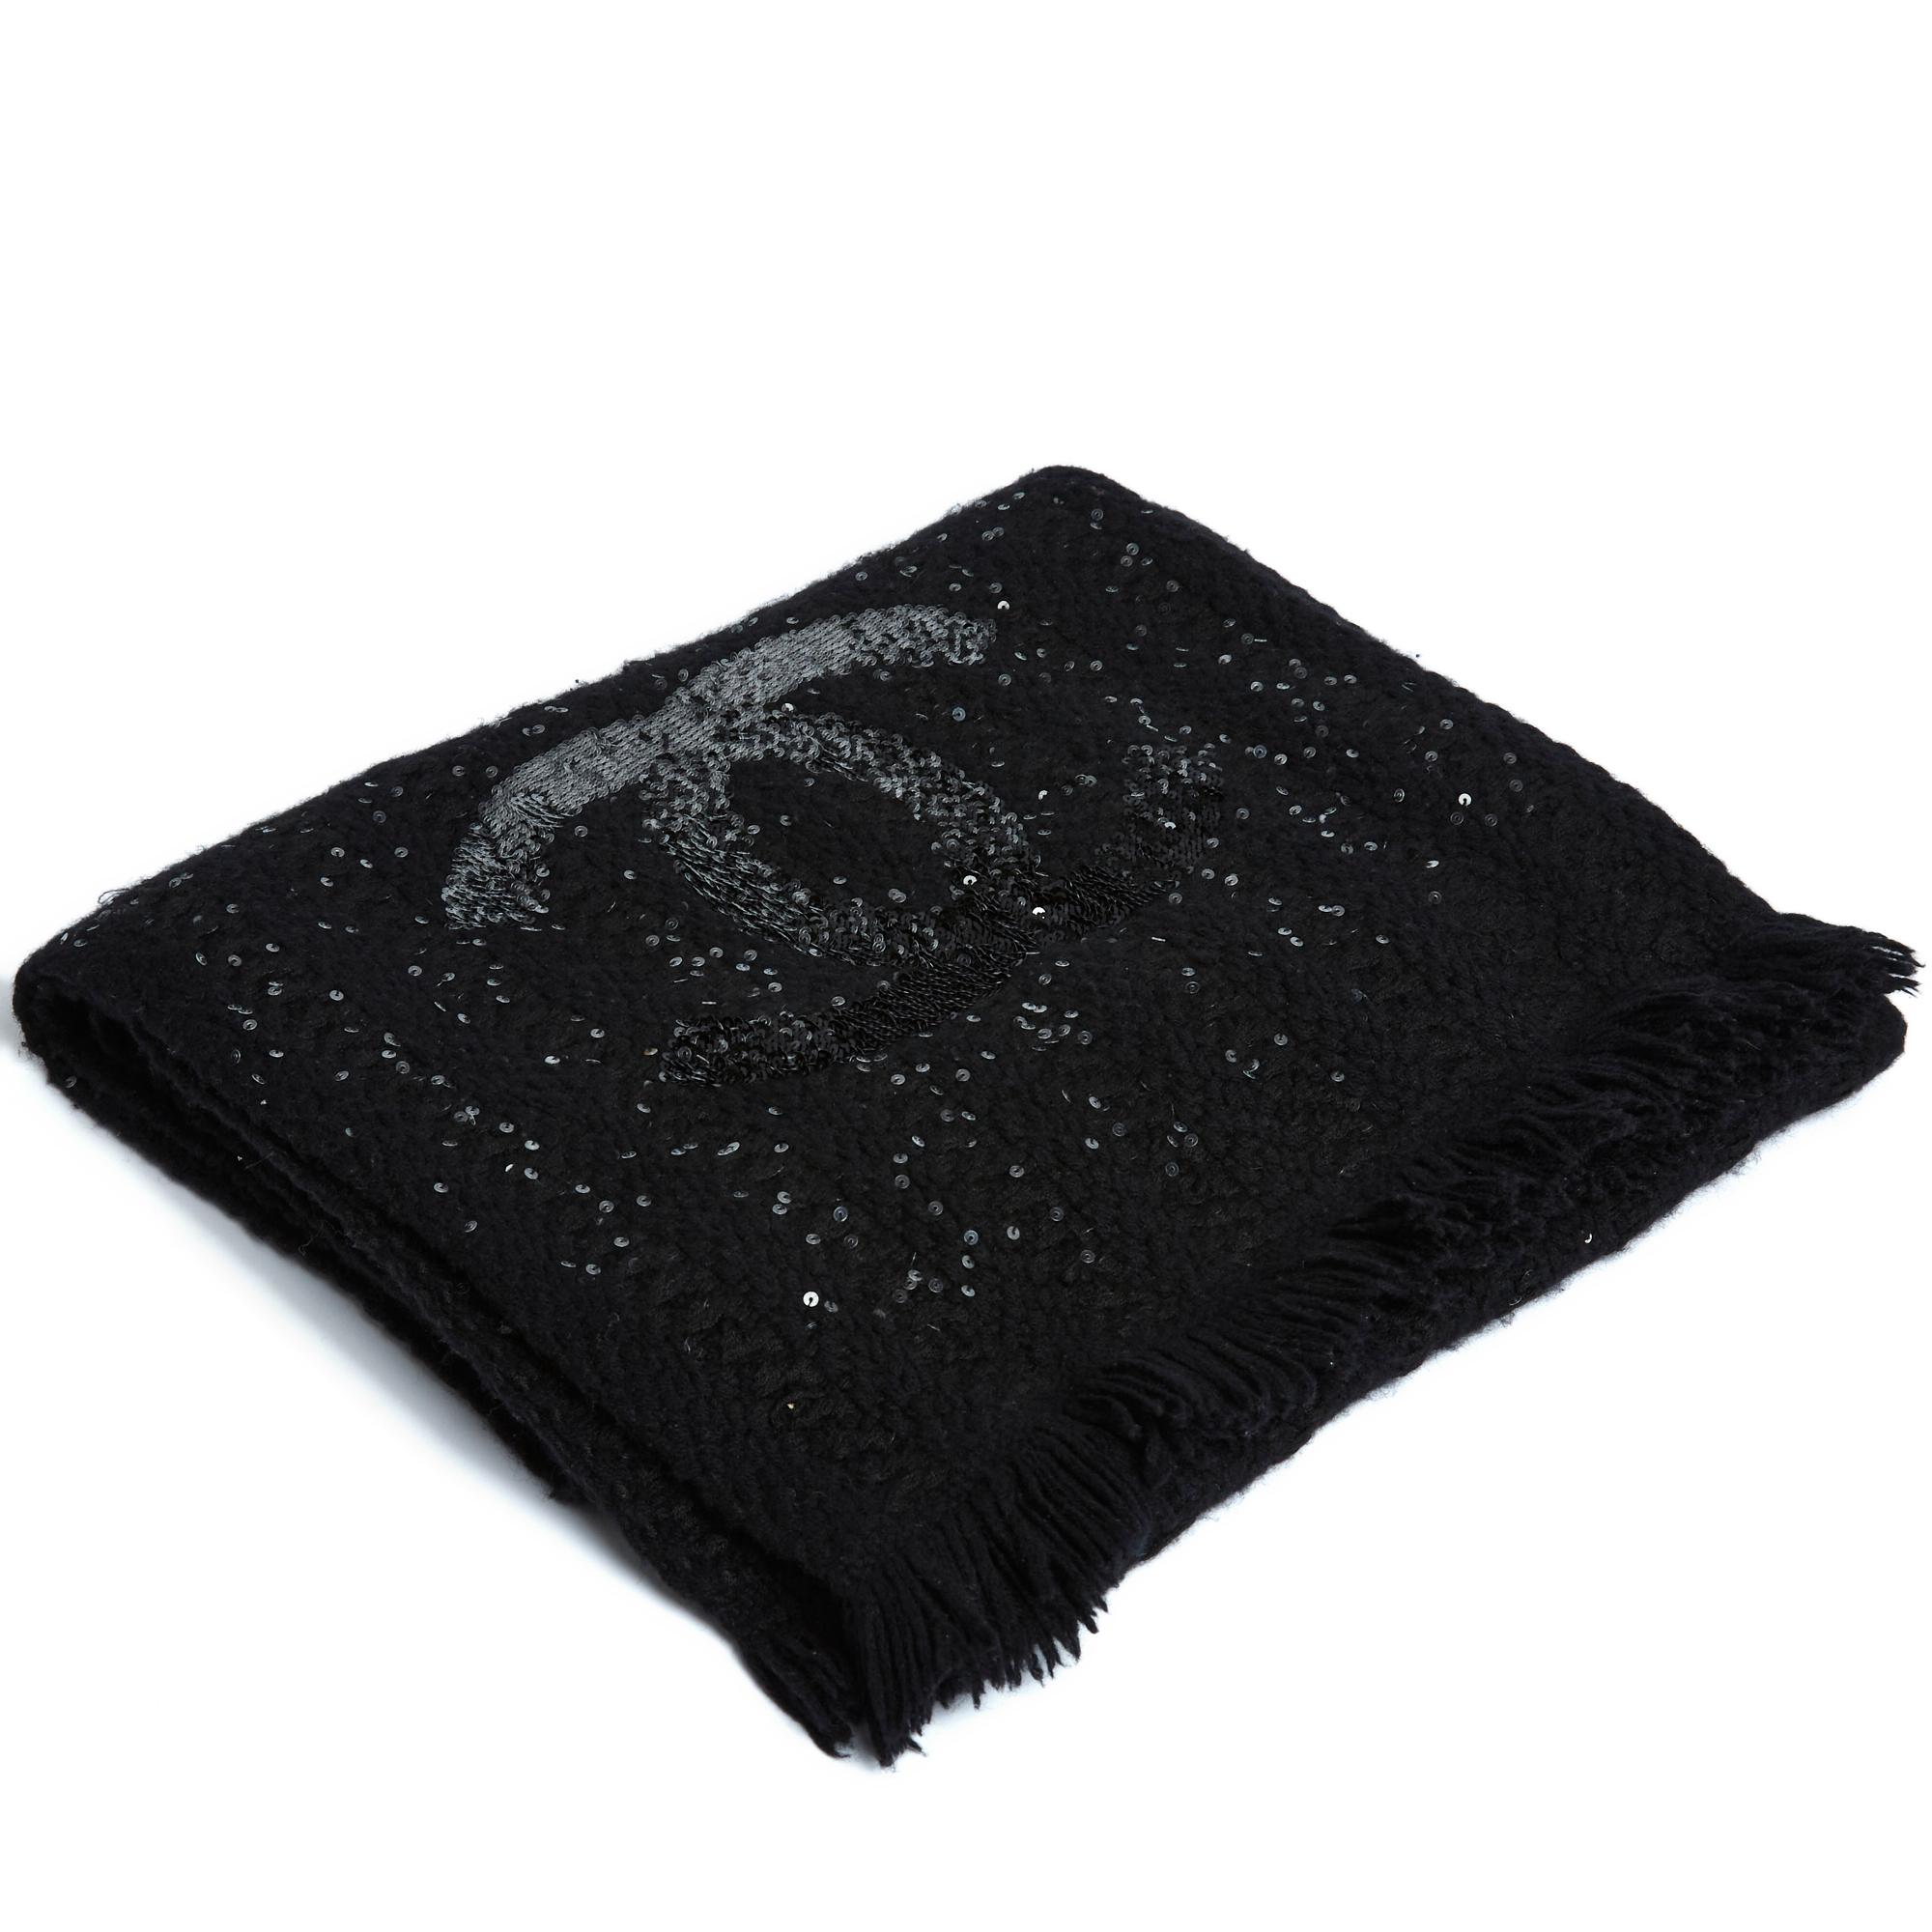 Chanel scarf in thick black cashmere knit embroidered with the CC logo in a gradient of translucent to black sequins, frayed finishes. Width 32.5 cm x length 208 cm. The scarf is magnificent: material, mesh, embroidery, everything is just right,